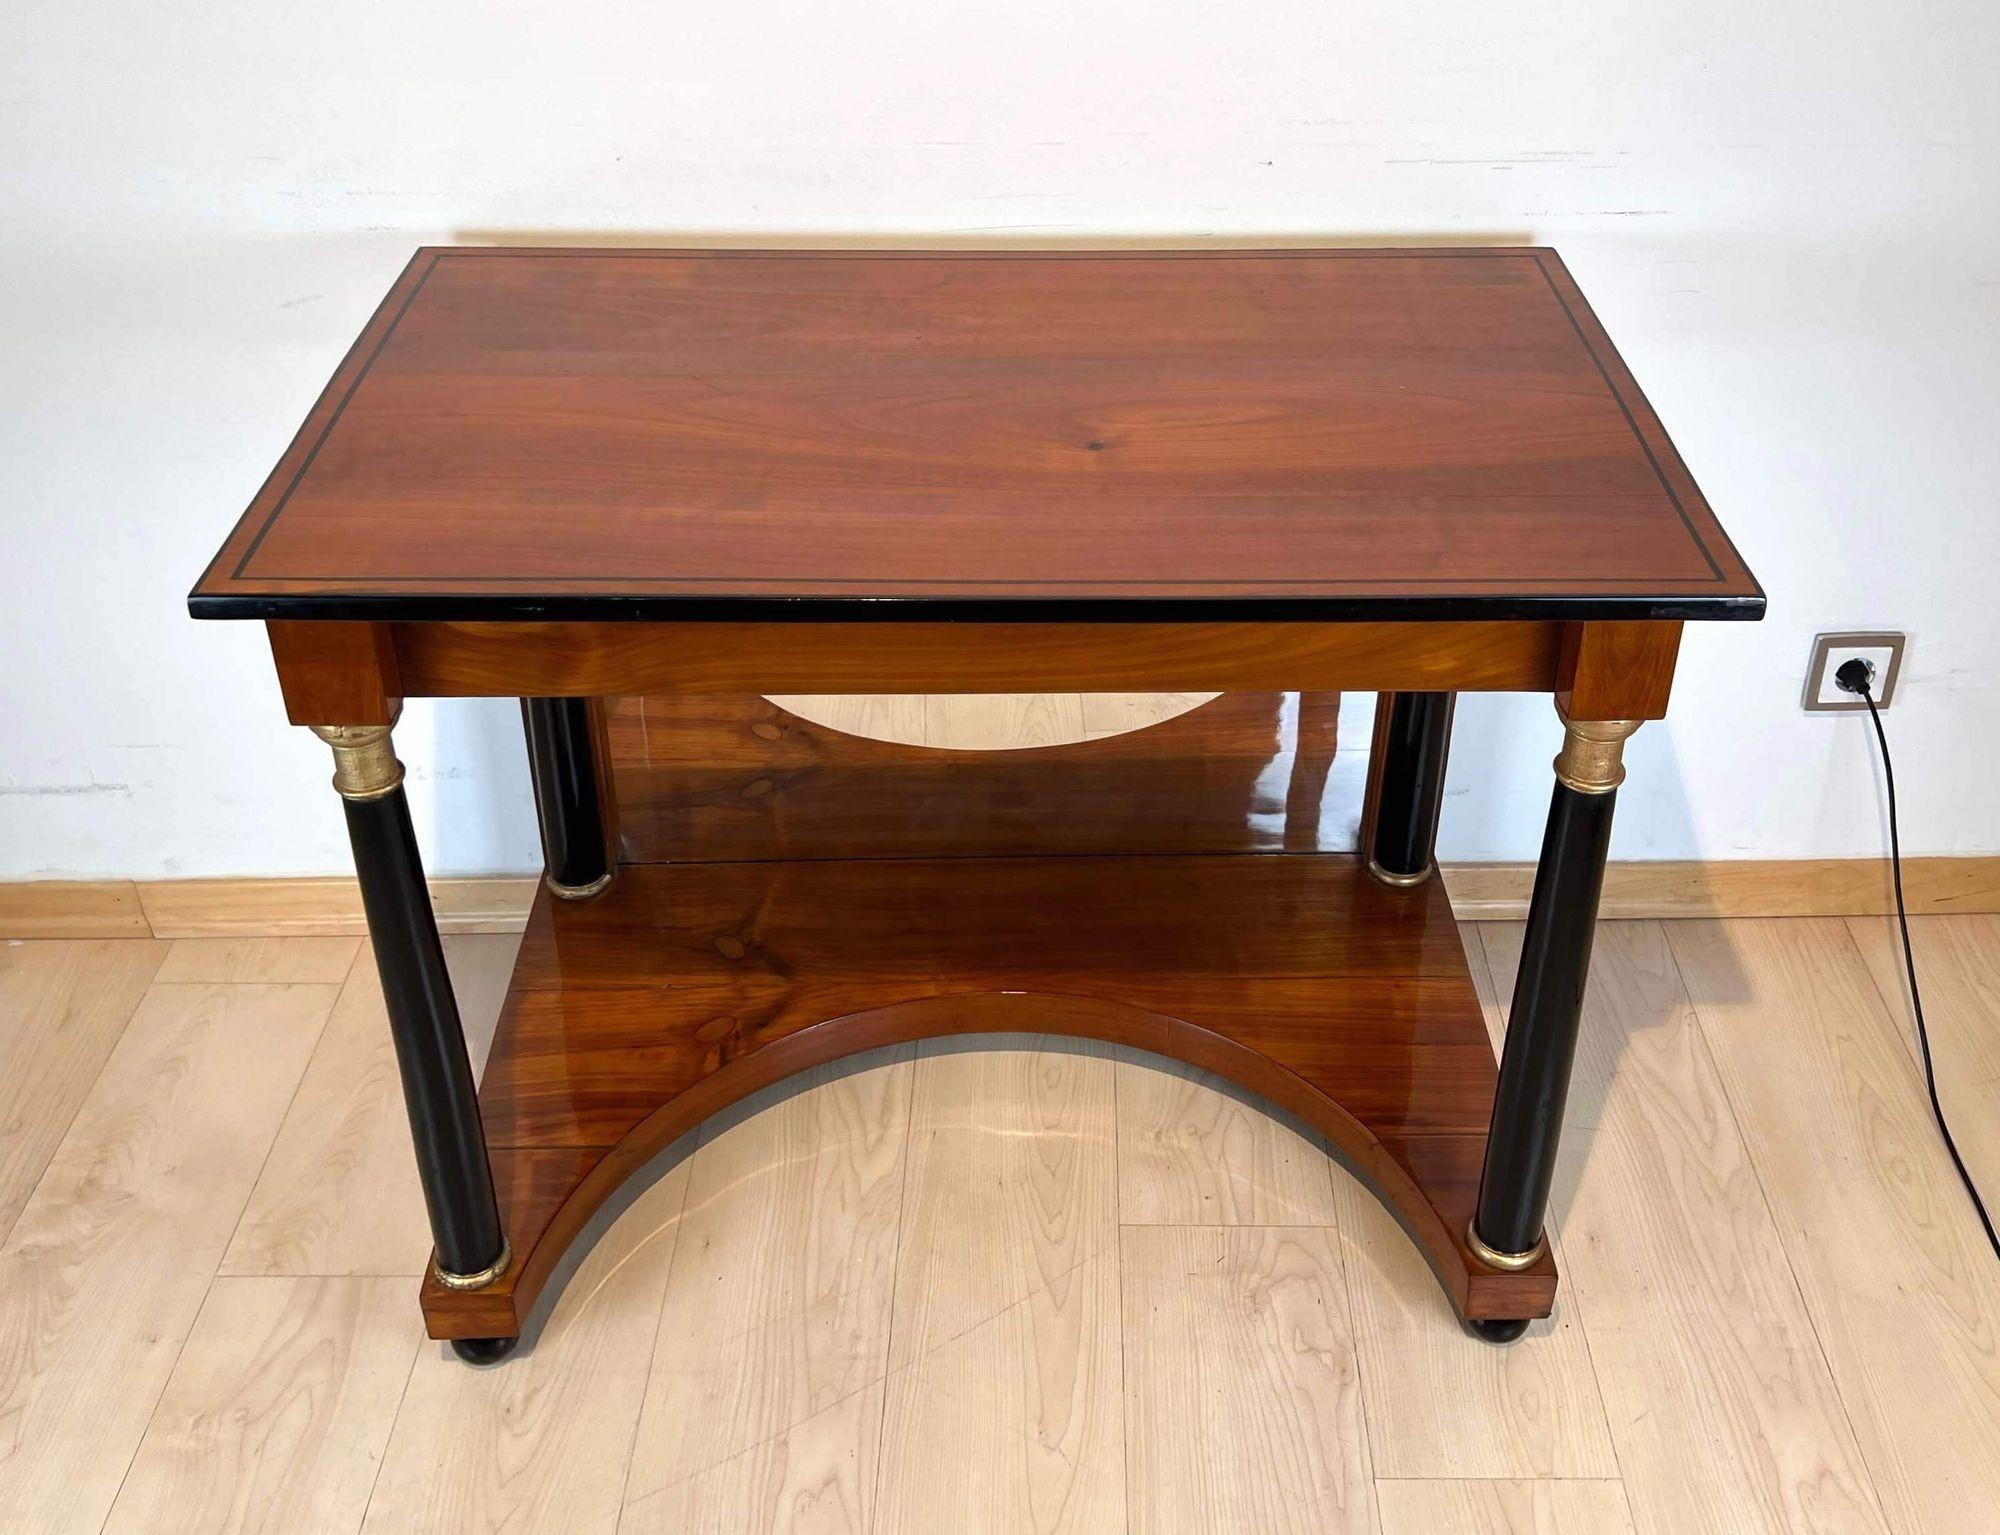 Biedermeier Console Table, Cherry Wood, Full Columns, South Germany circa 1820 For Sale 8